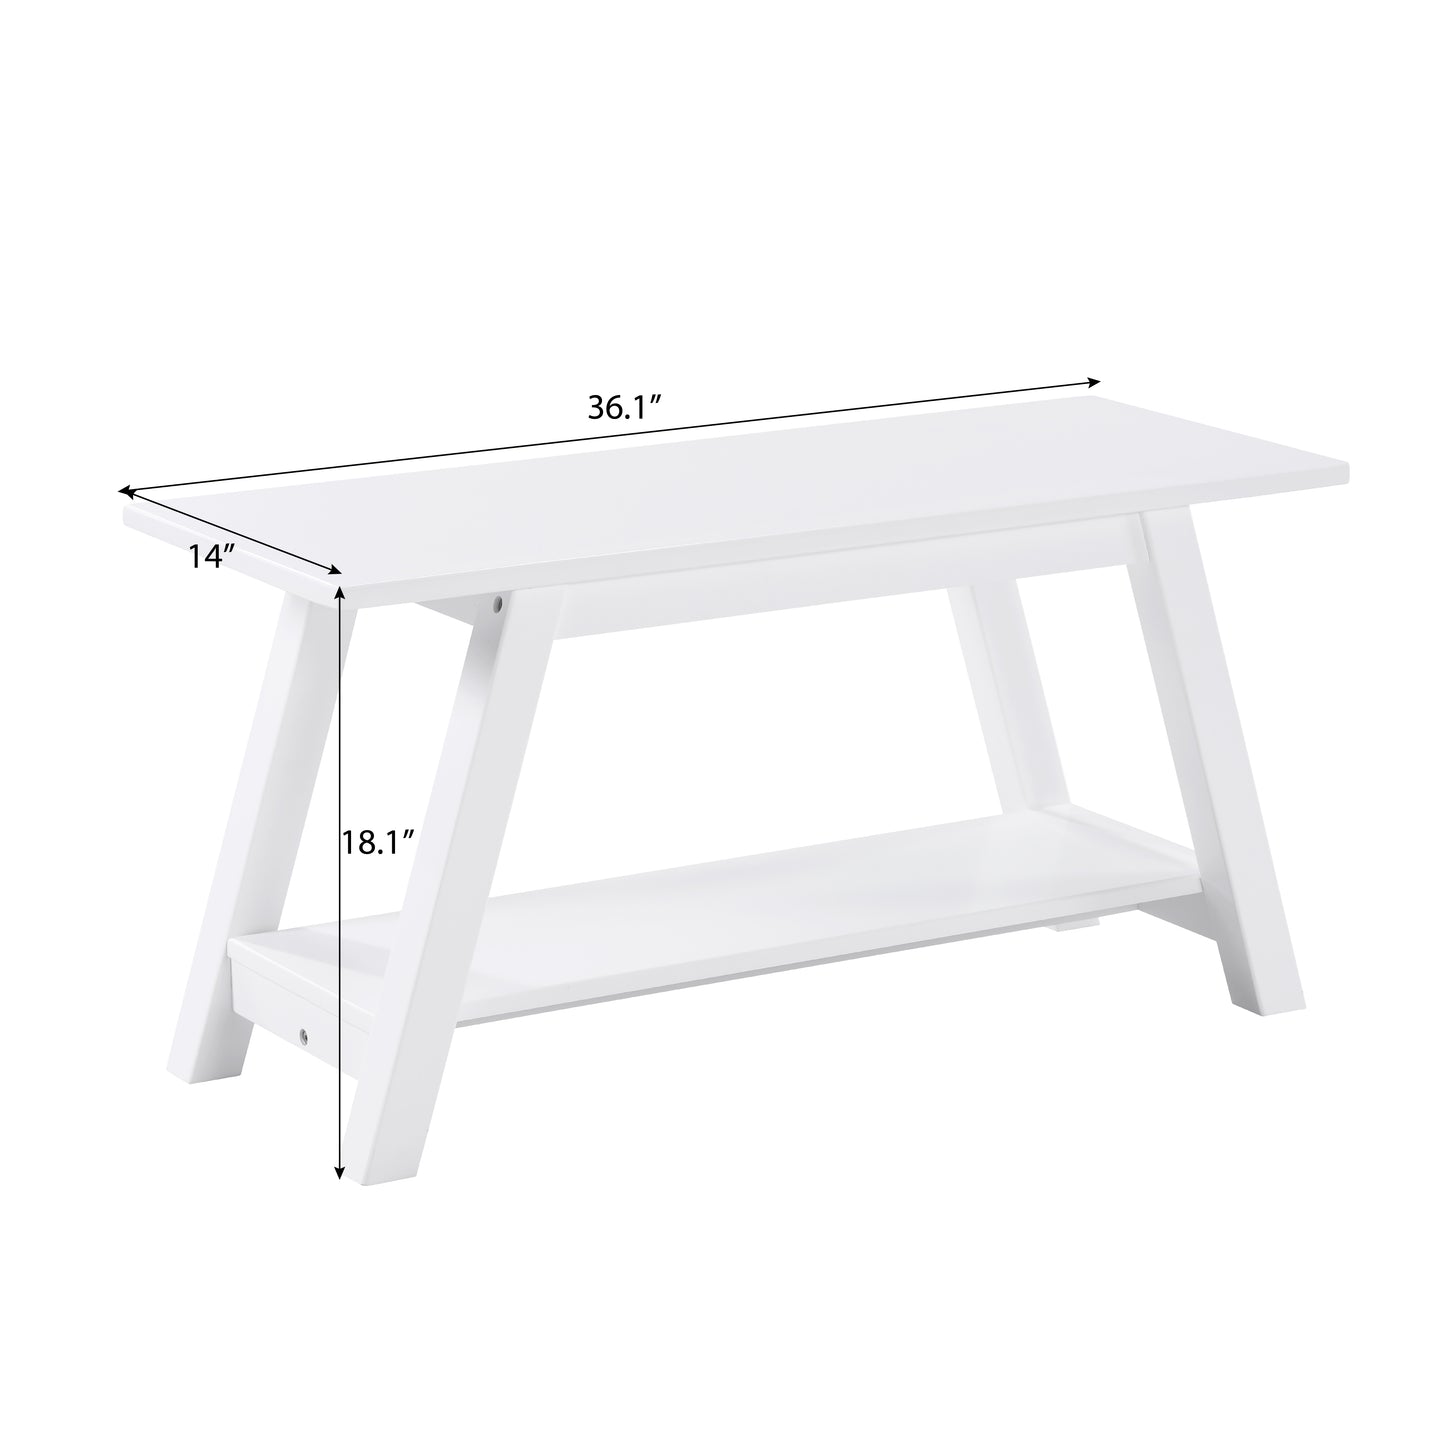 Roundhill Furniture Elyz Solid Wood Bench with Shelf, 36.10-Inch Long, White